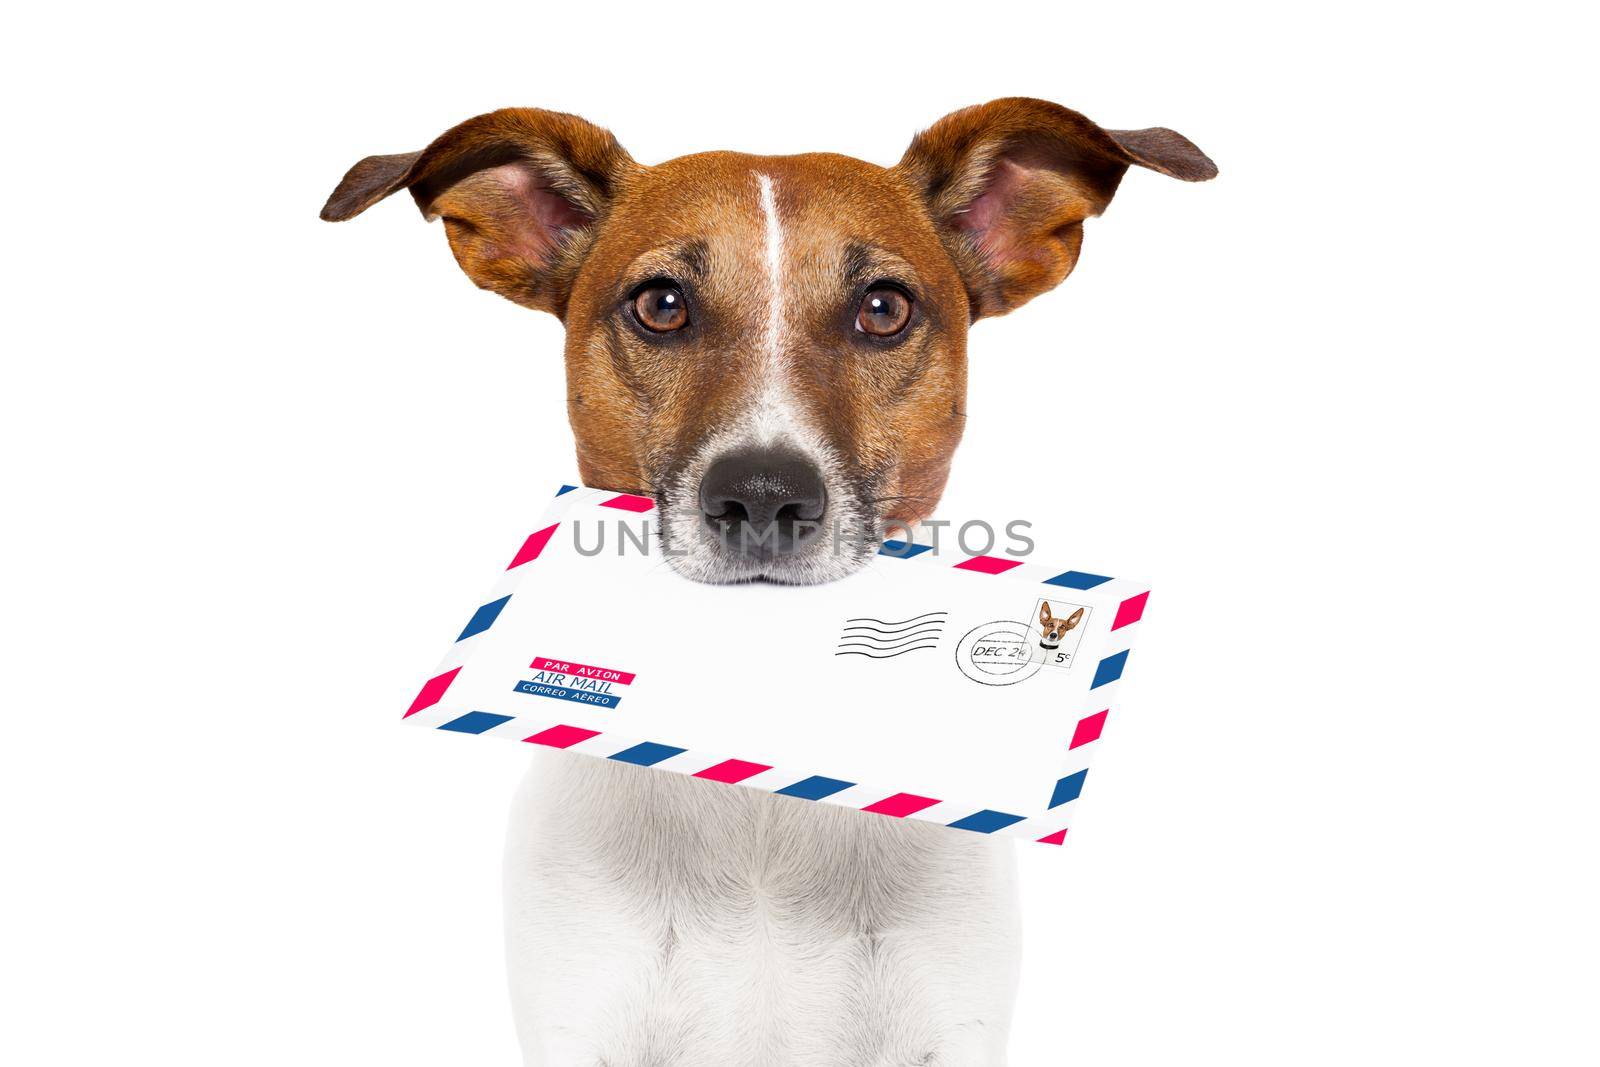 dog with glasses delivering air mail envelope with stamp